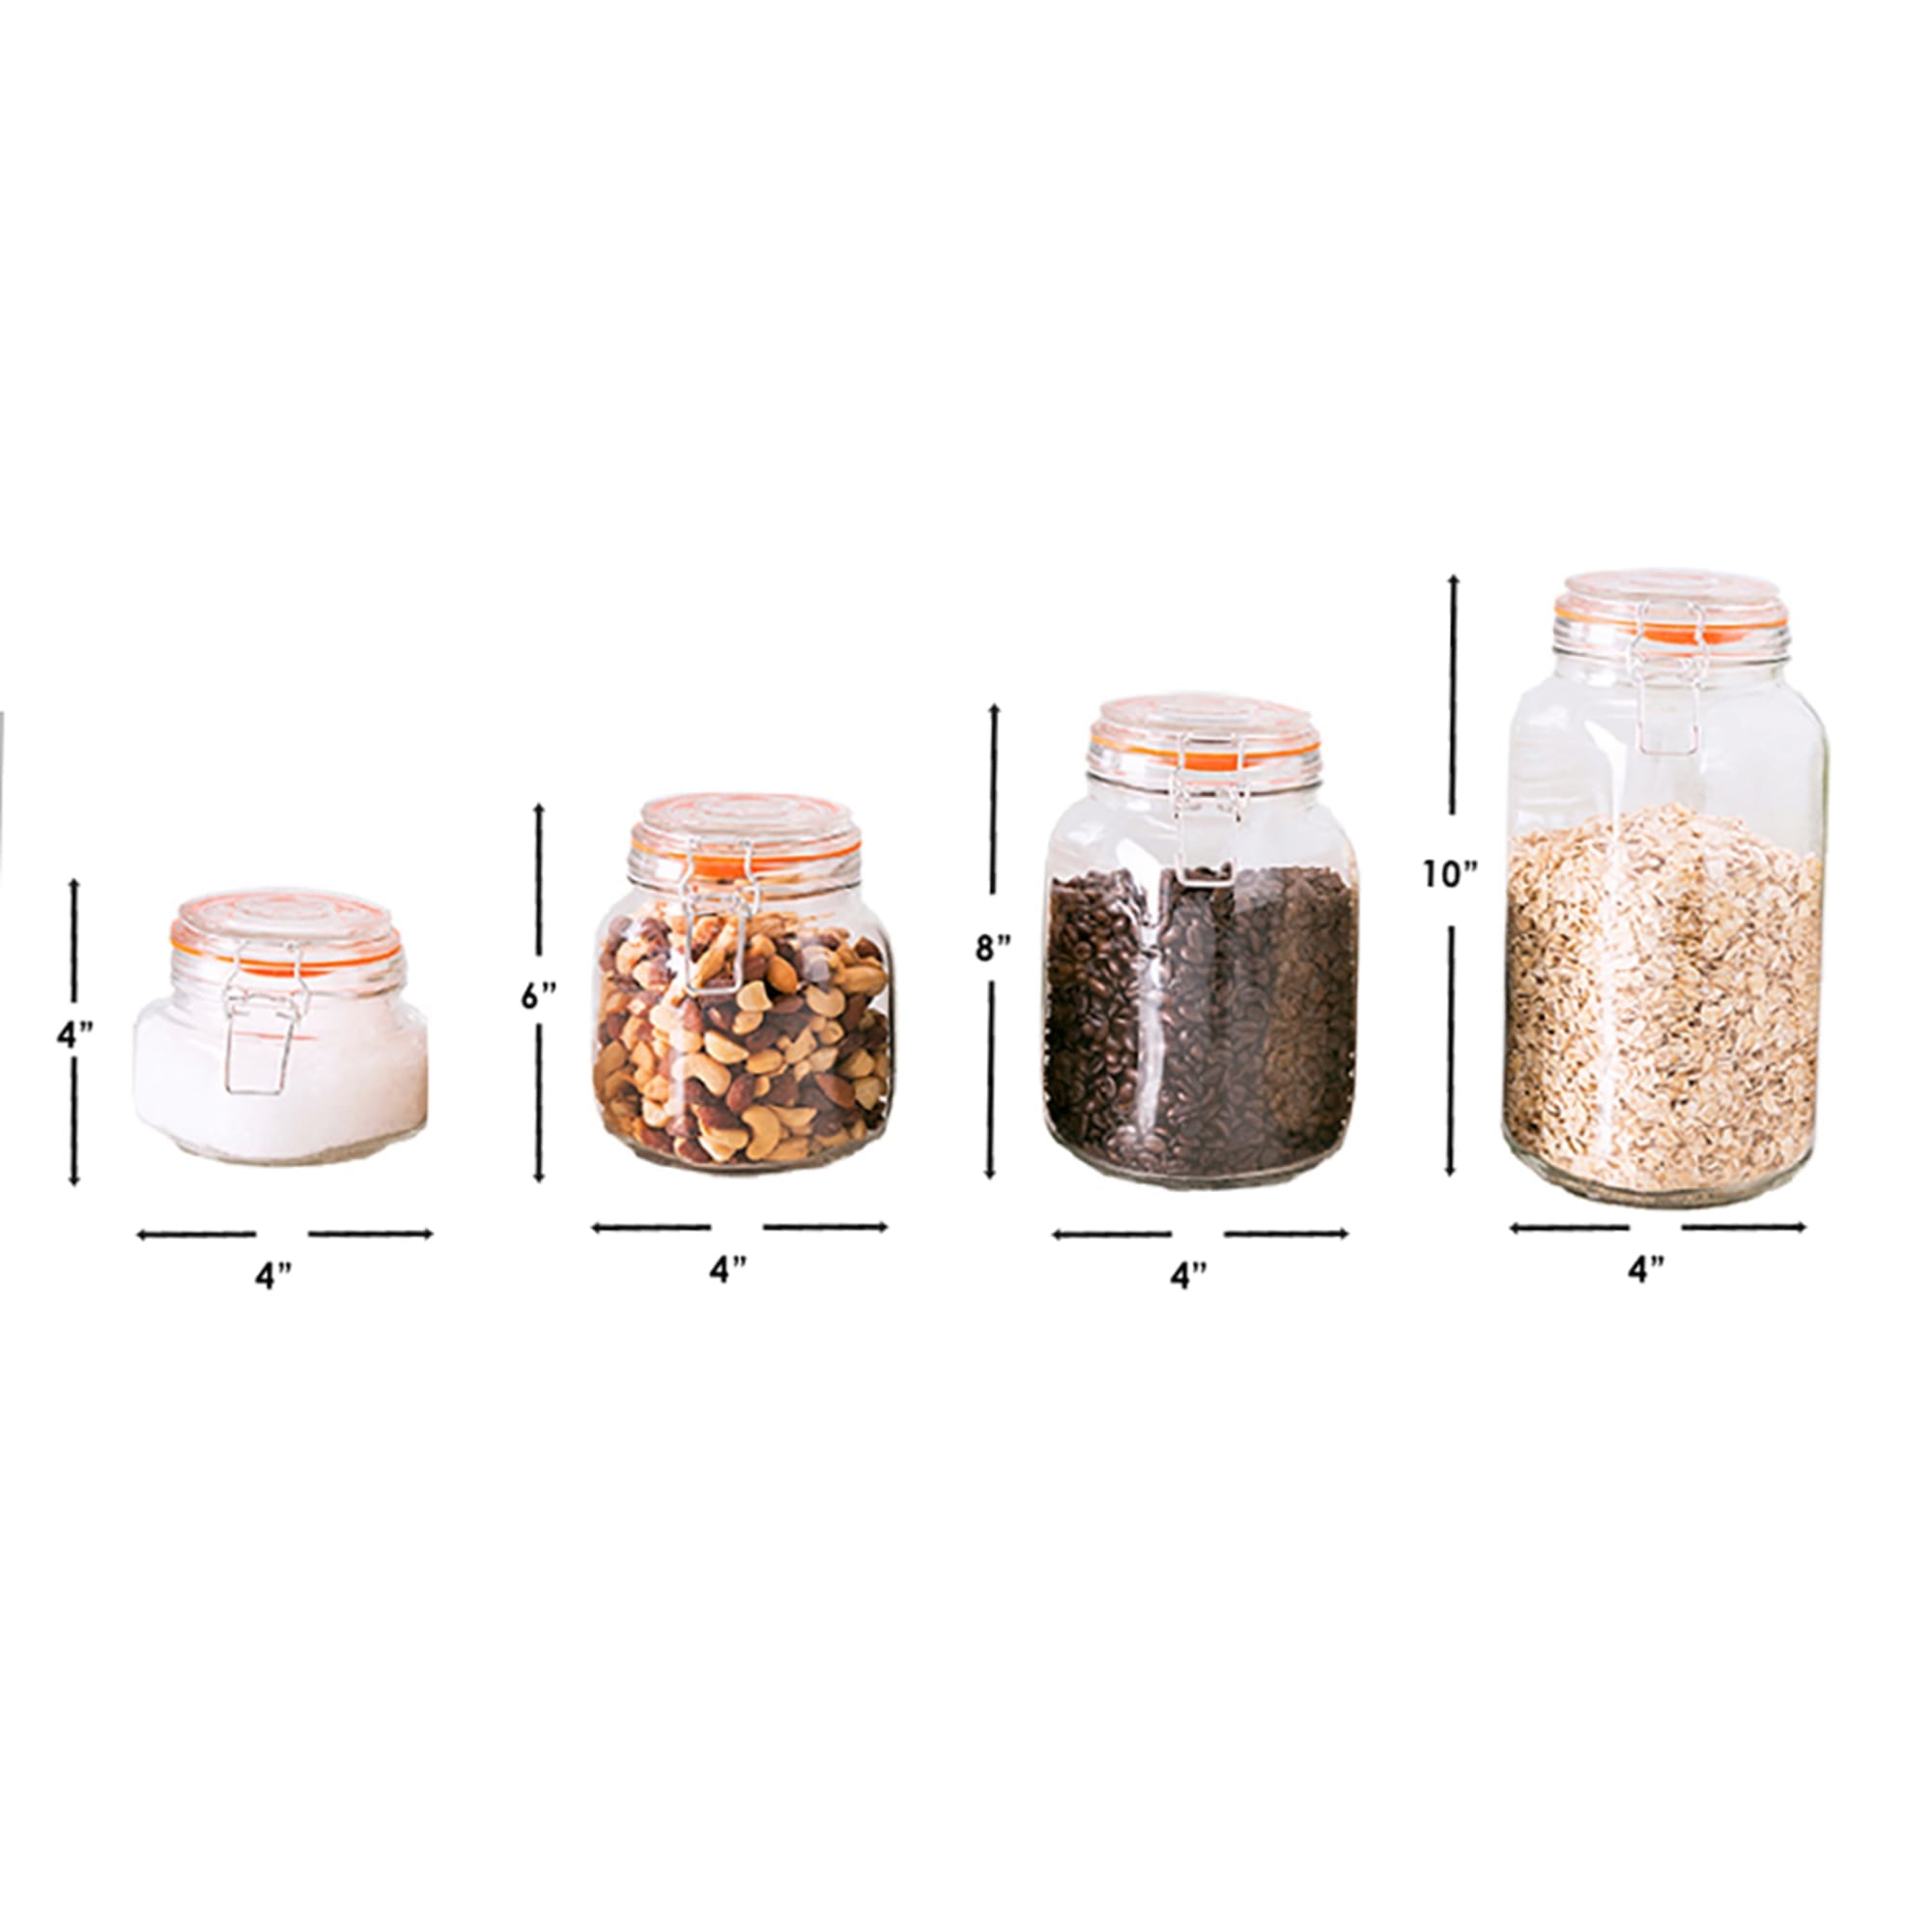 Home Basics 4 Piece Glass Canister Set, Clear $15.00 EACH, CASE PACK OF 6